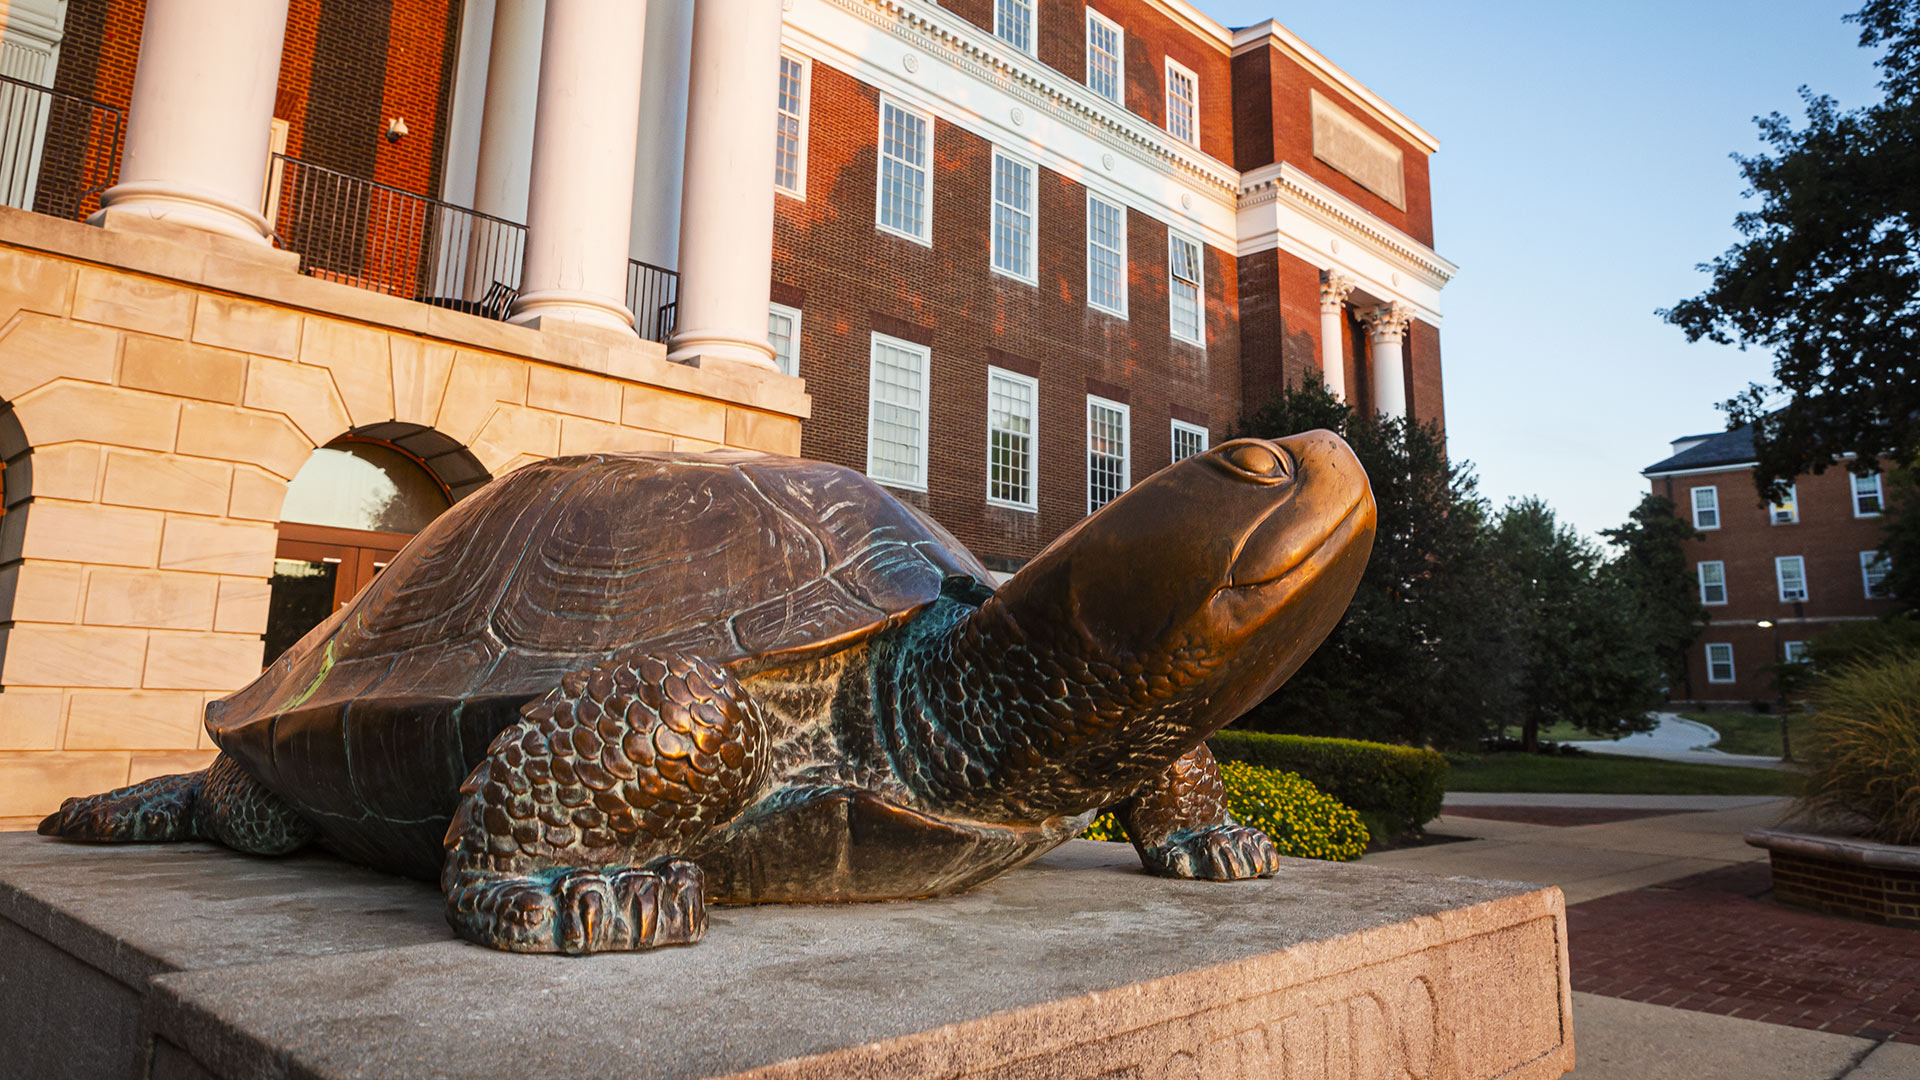 Testudo Statue at sunrise outside of McKeldin Library at the University of Maryland